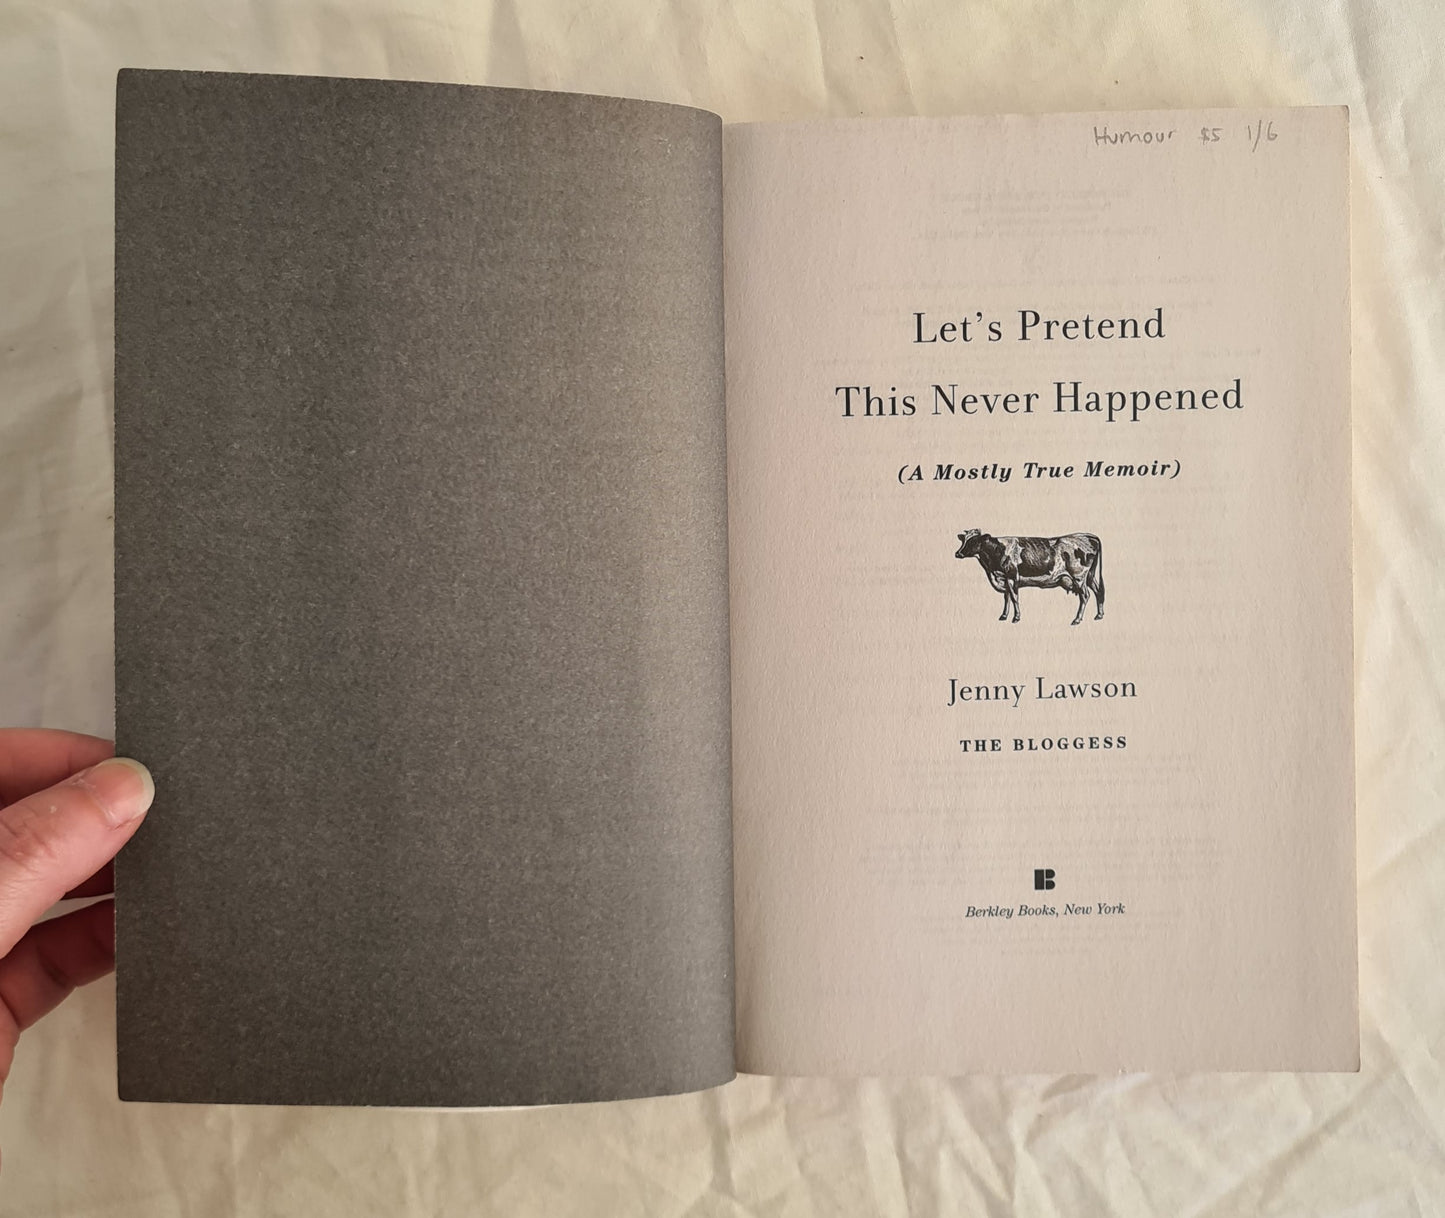 Let’s Pretend This Never Happened by Jenny Lawson